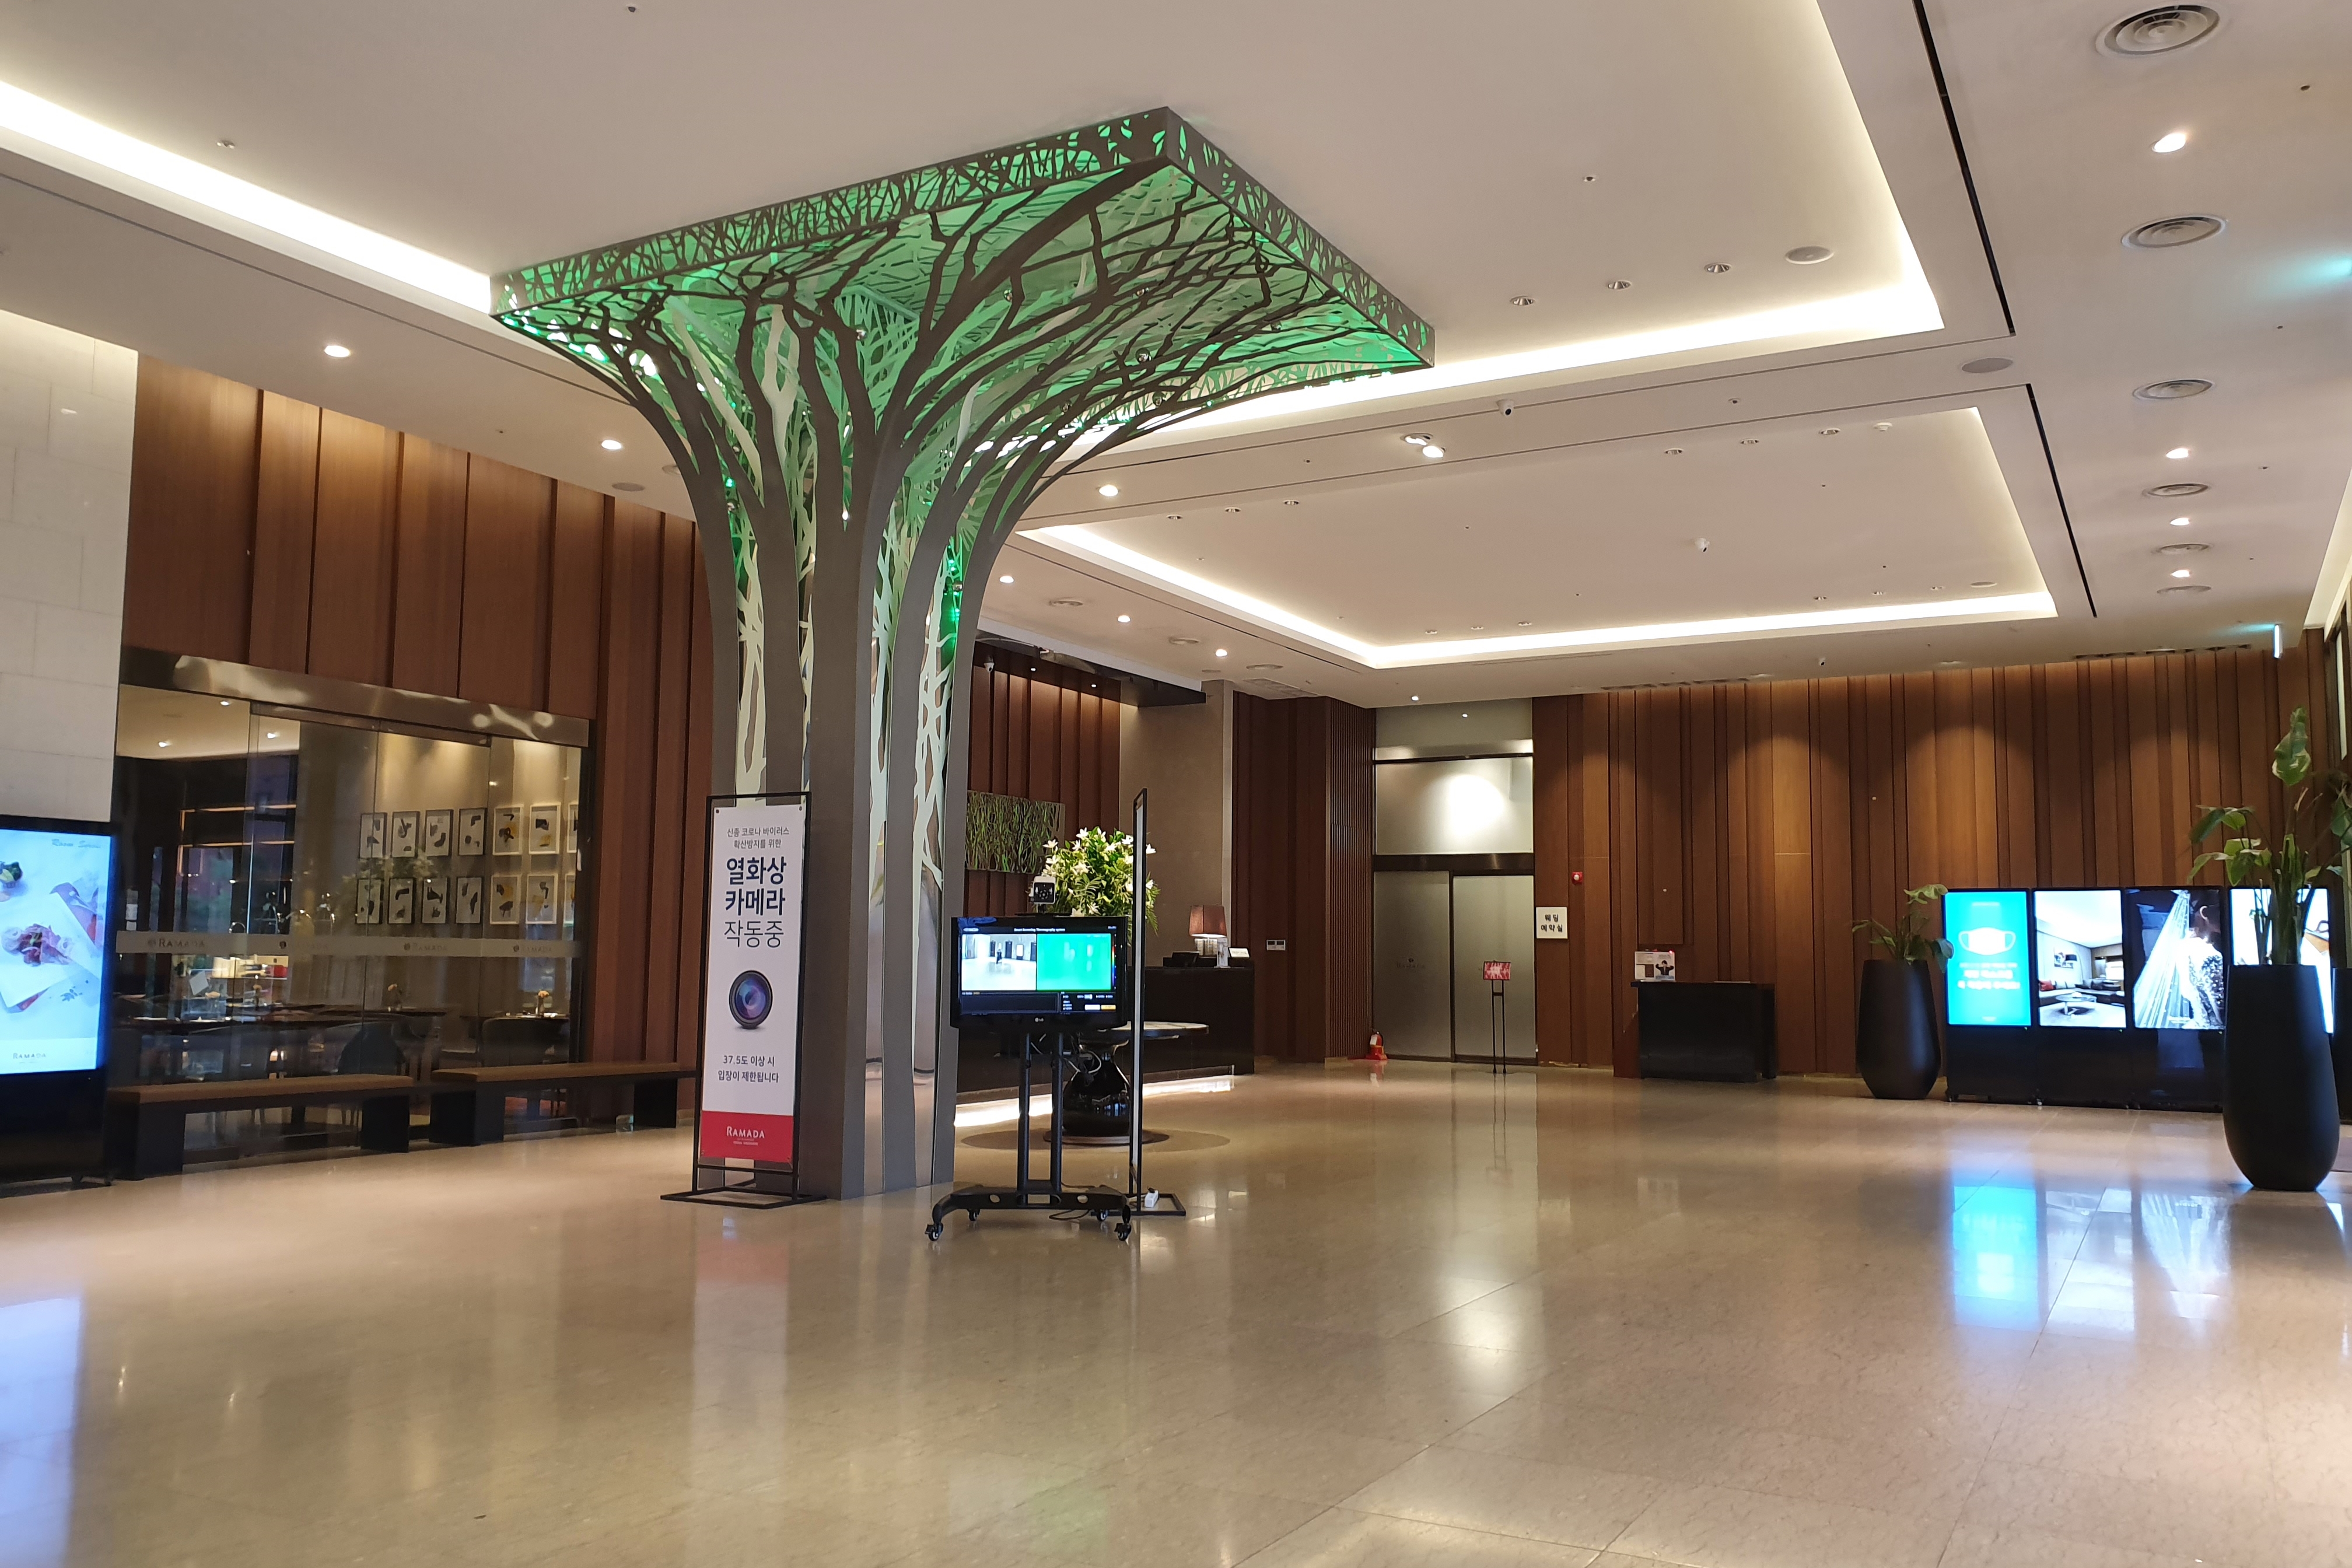 Ramada Seoul Sindorim Hotel1 : Spacious hotel lobby with a large tree-shaped column in the middle